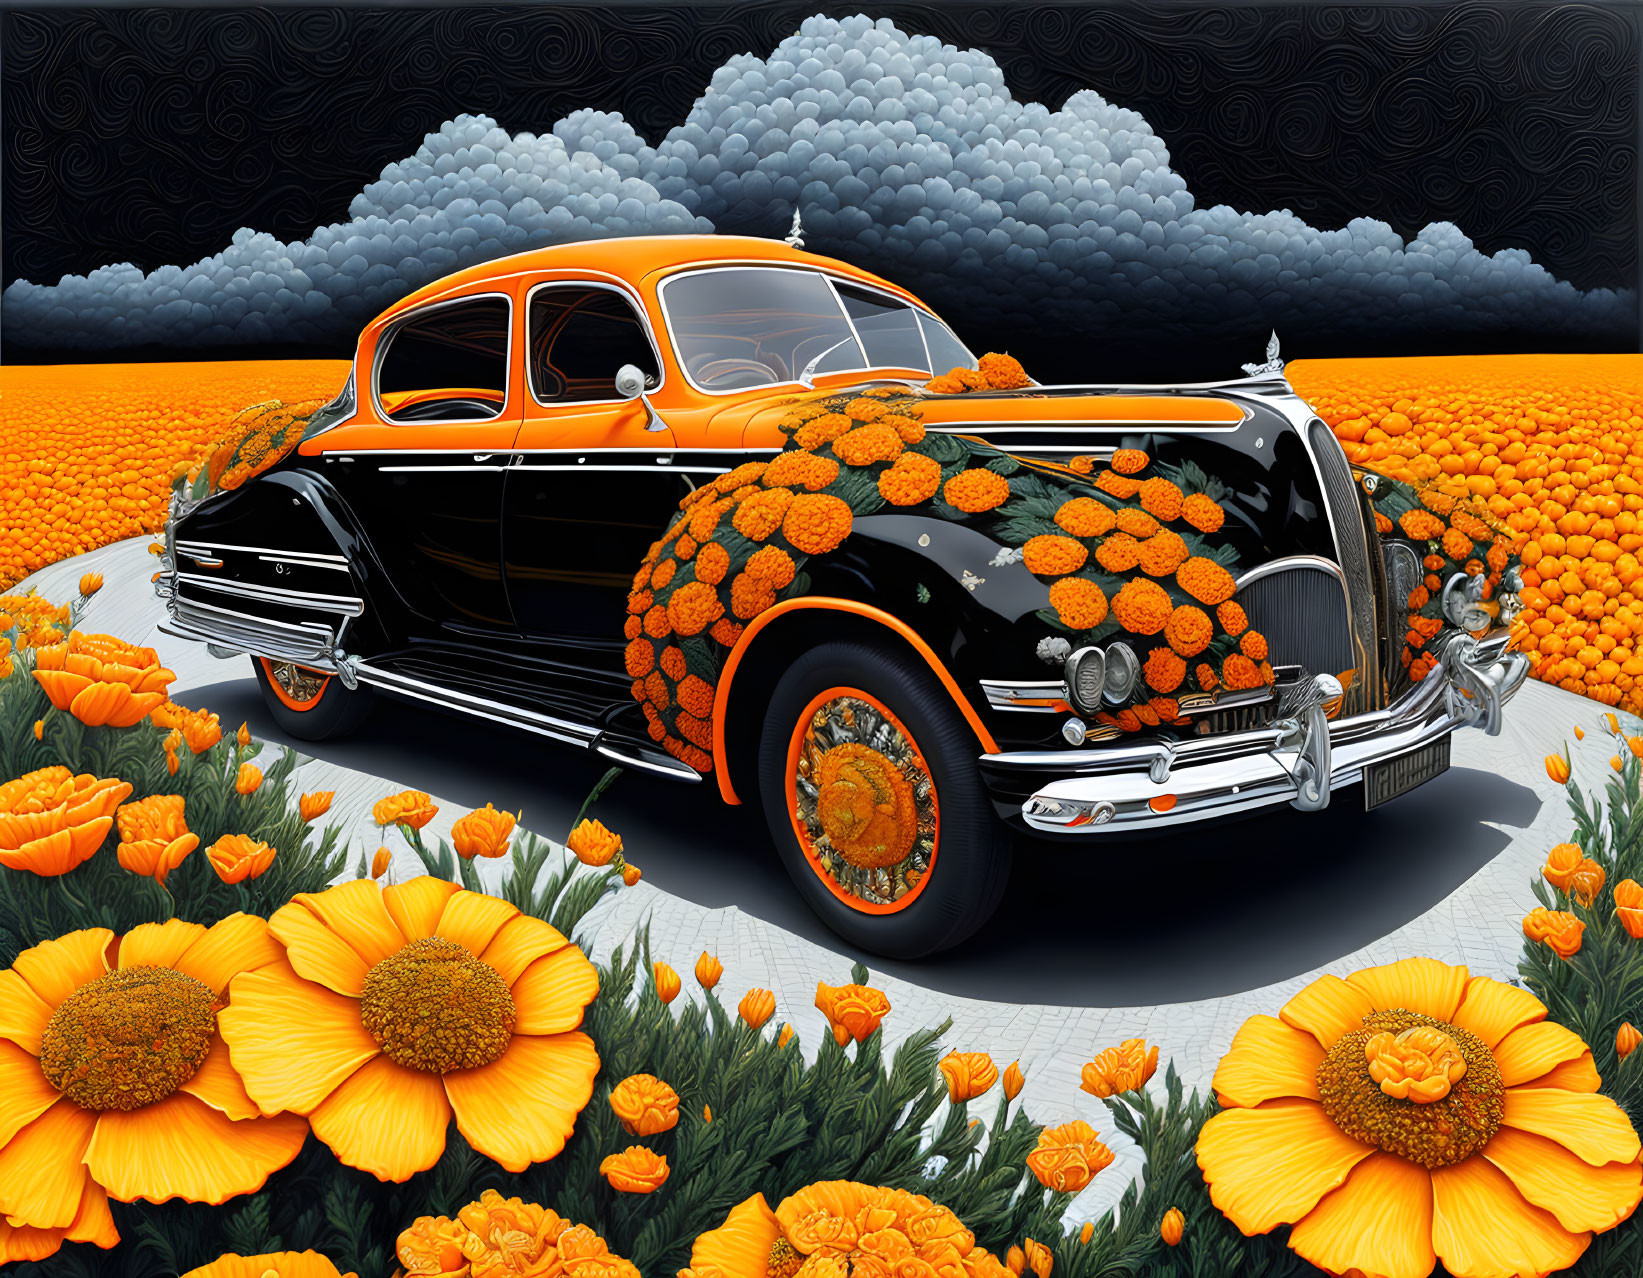 Vintage black and orange car with floral patterns in a vibrant setting